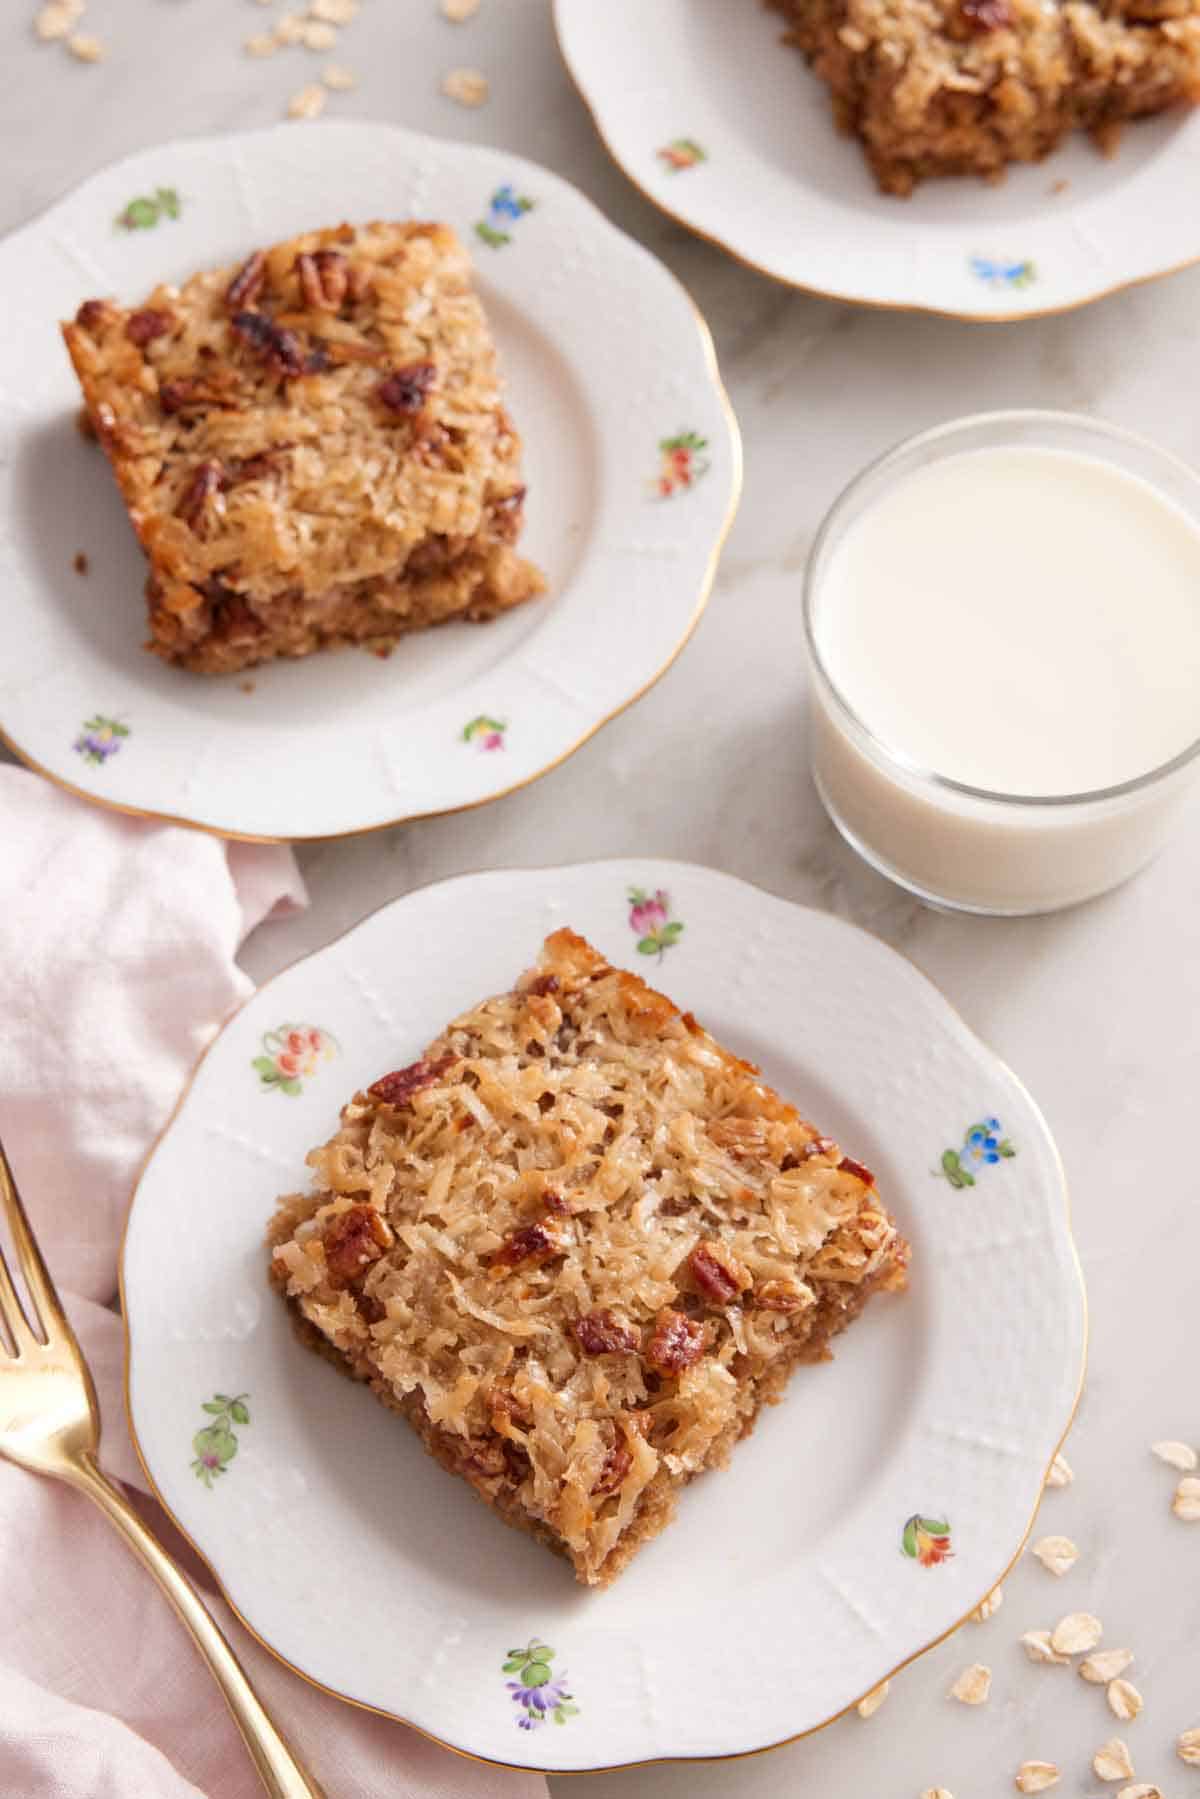 Overhead view of two plates of oatmeal cake with a glass of milk.